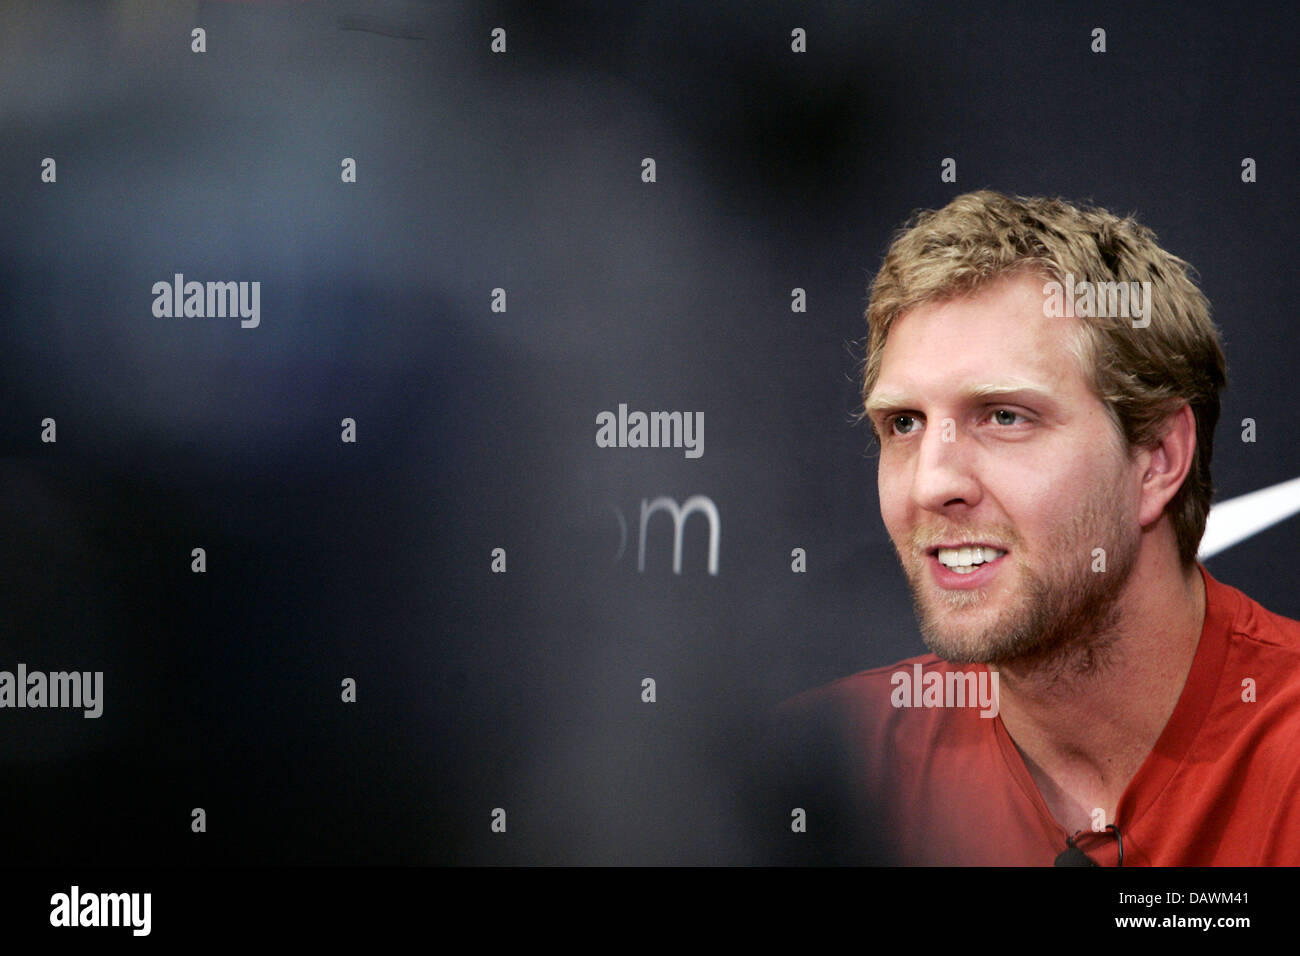 German basketball pro Dirk Nowitzki smiles at a press conference in Frankfurt Main, Germany, 22 May 2007. Nowitzki was elected MVP of this year's NBA season being the first-ever European to be granted this award. Photo: Frank May Stock Photo